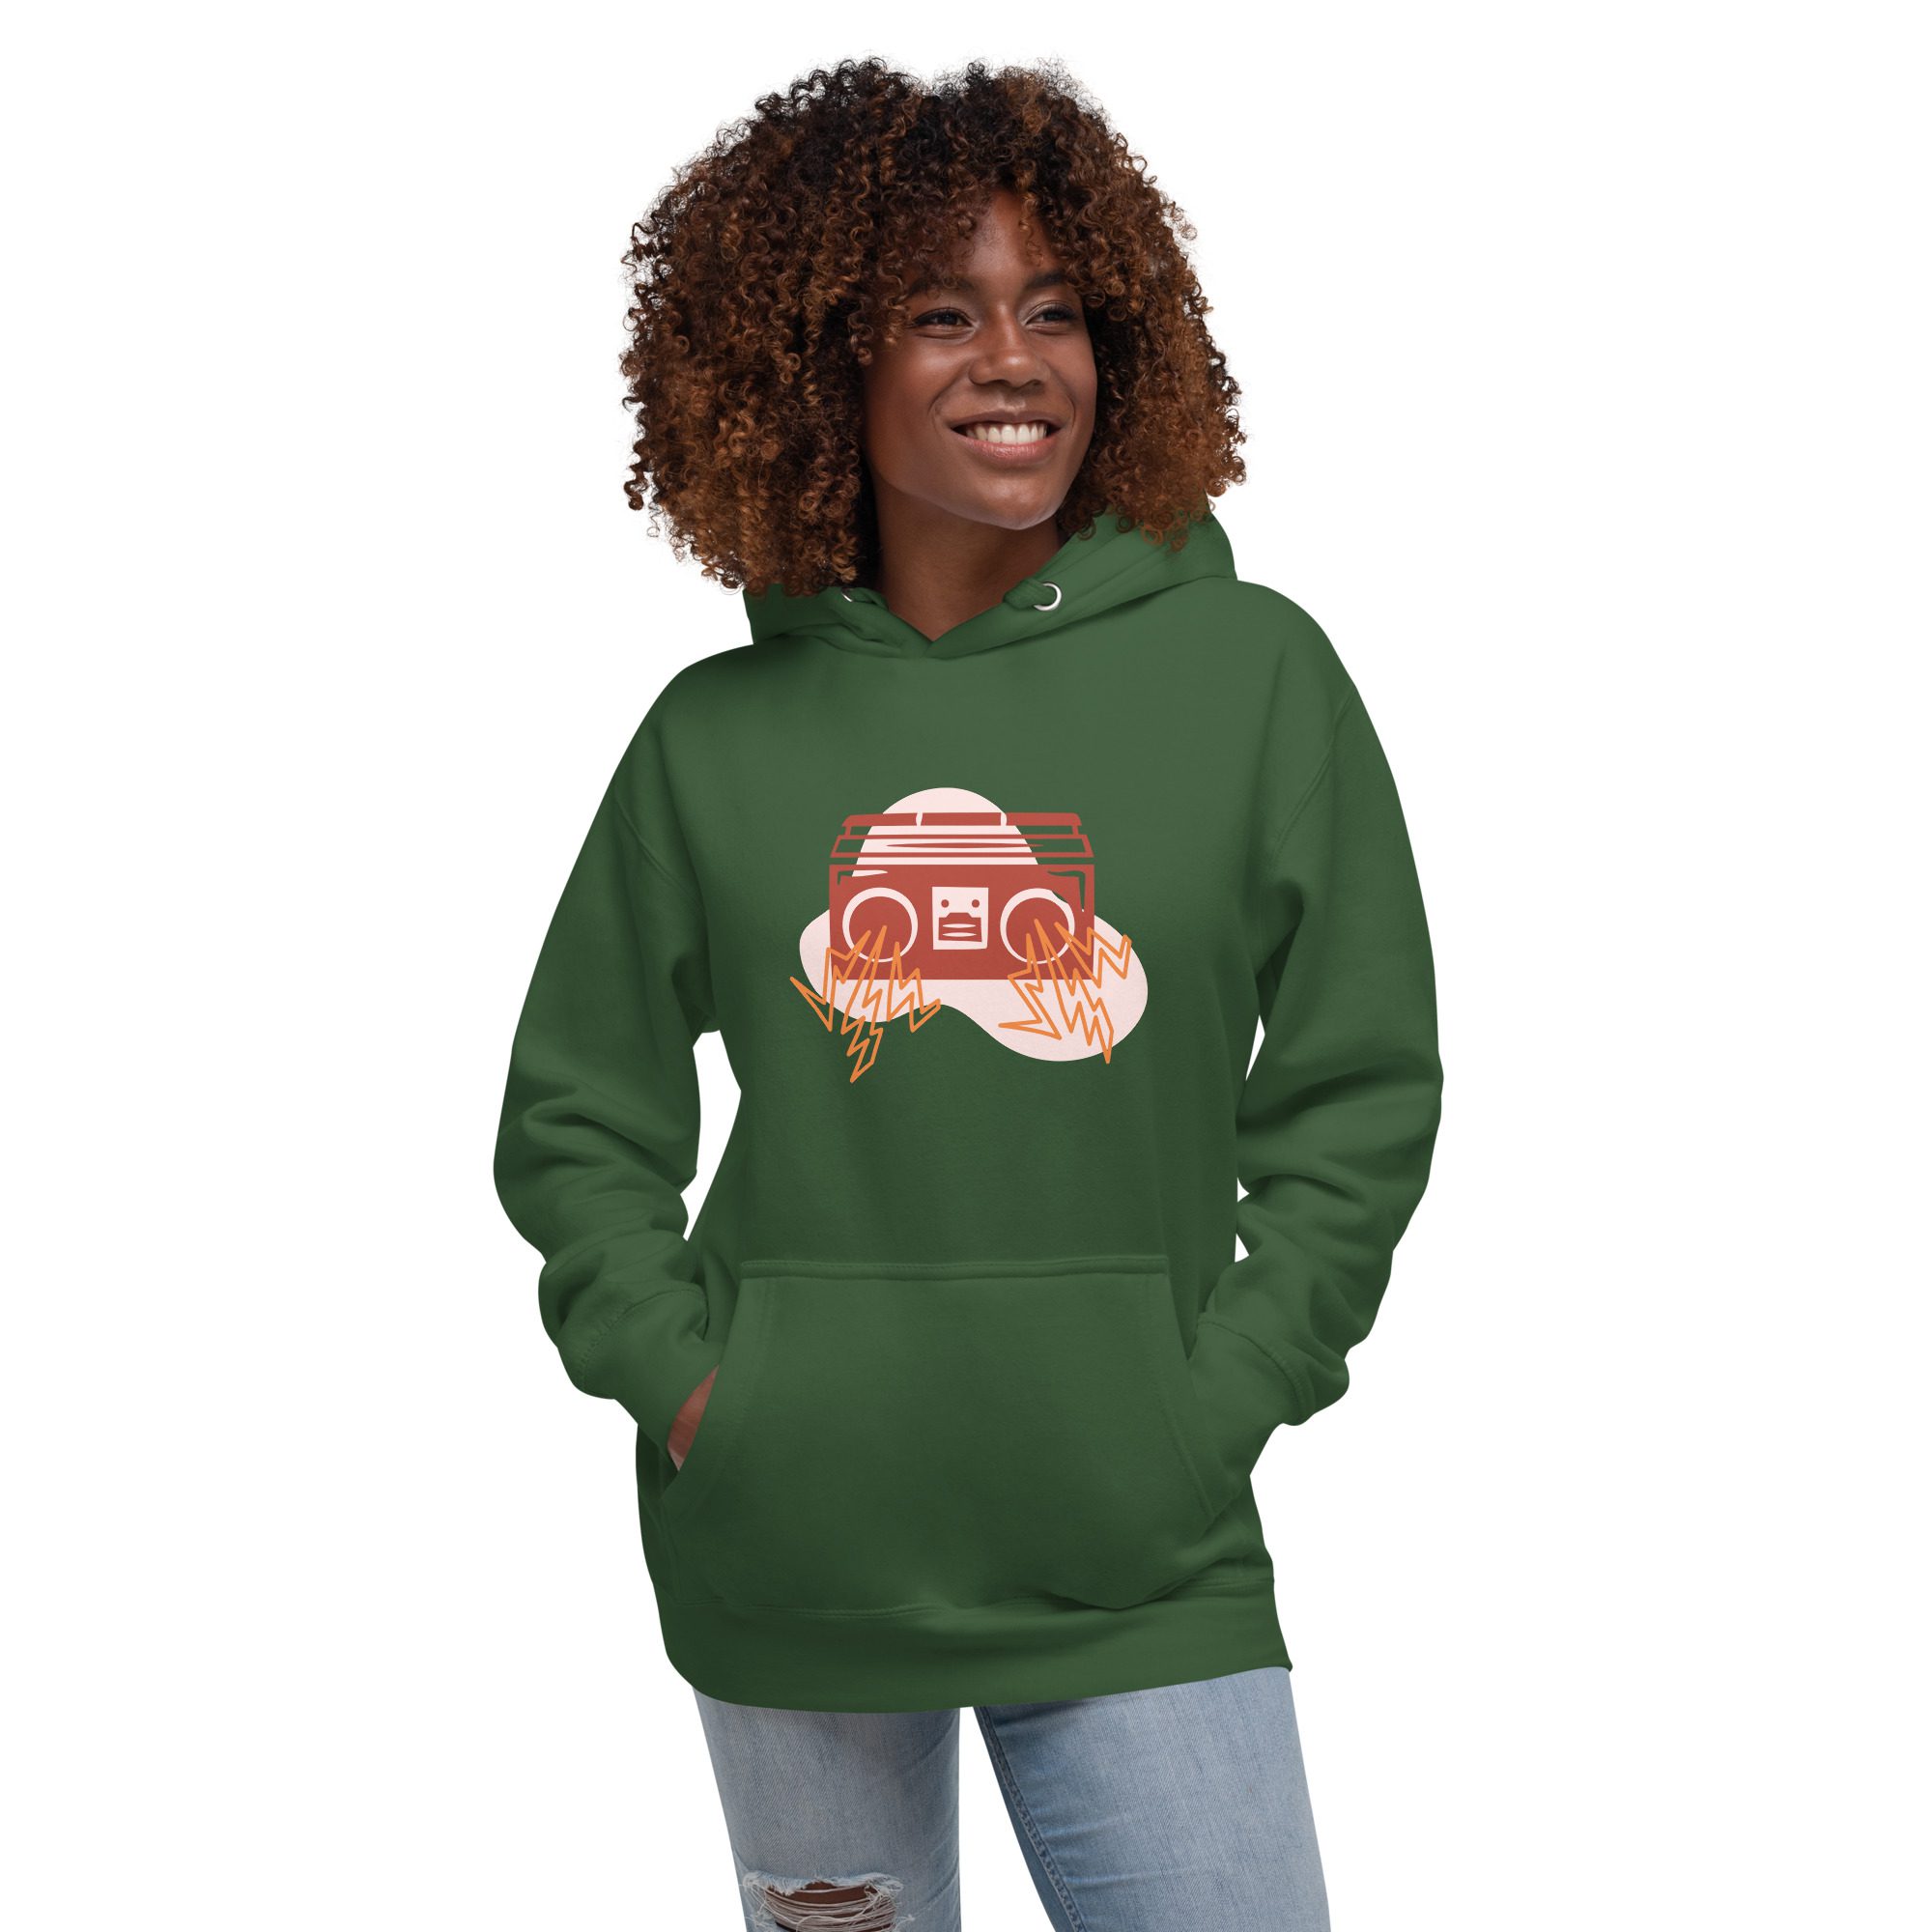 unisex premium hoodie forest green front 65297fc69b6a8